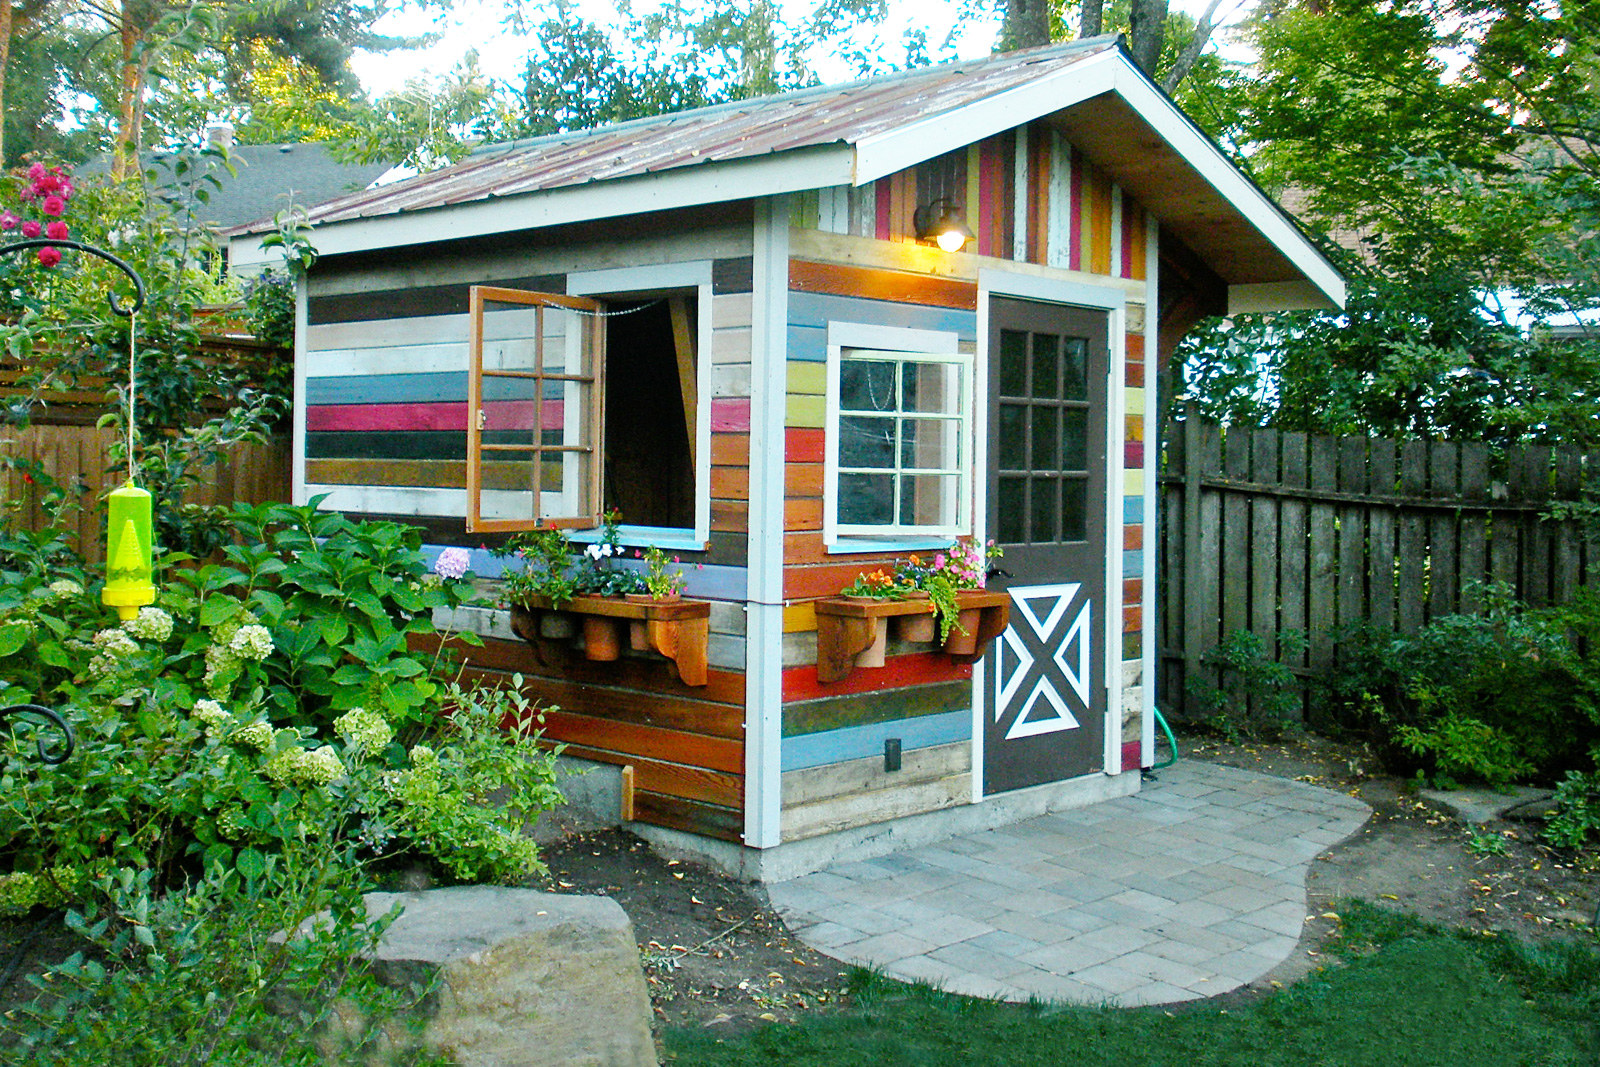 Livable Sheds Cost Of Building A Shed Shed Kits